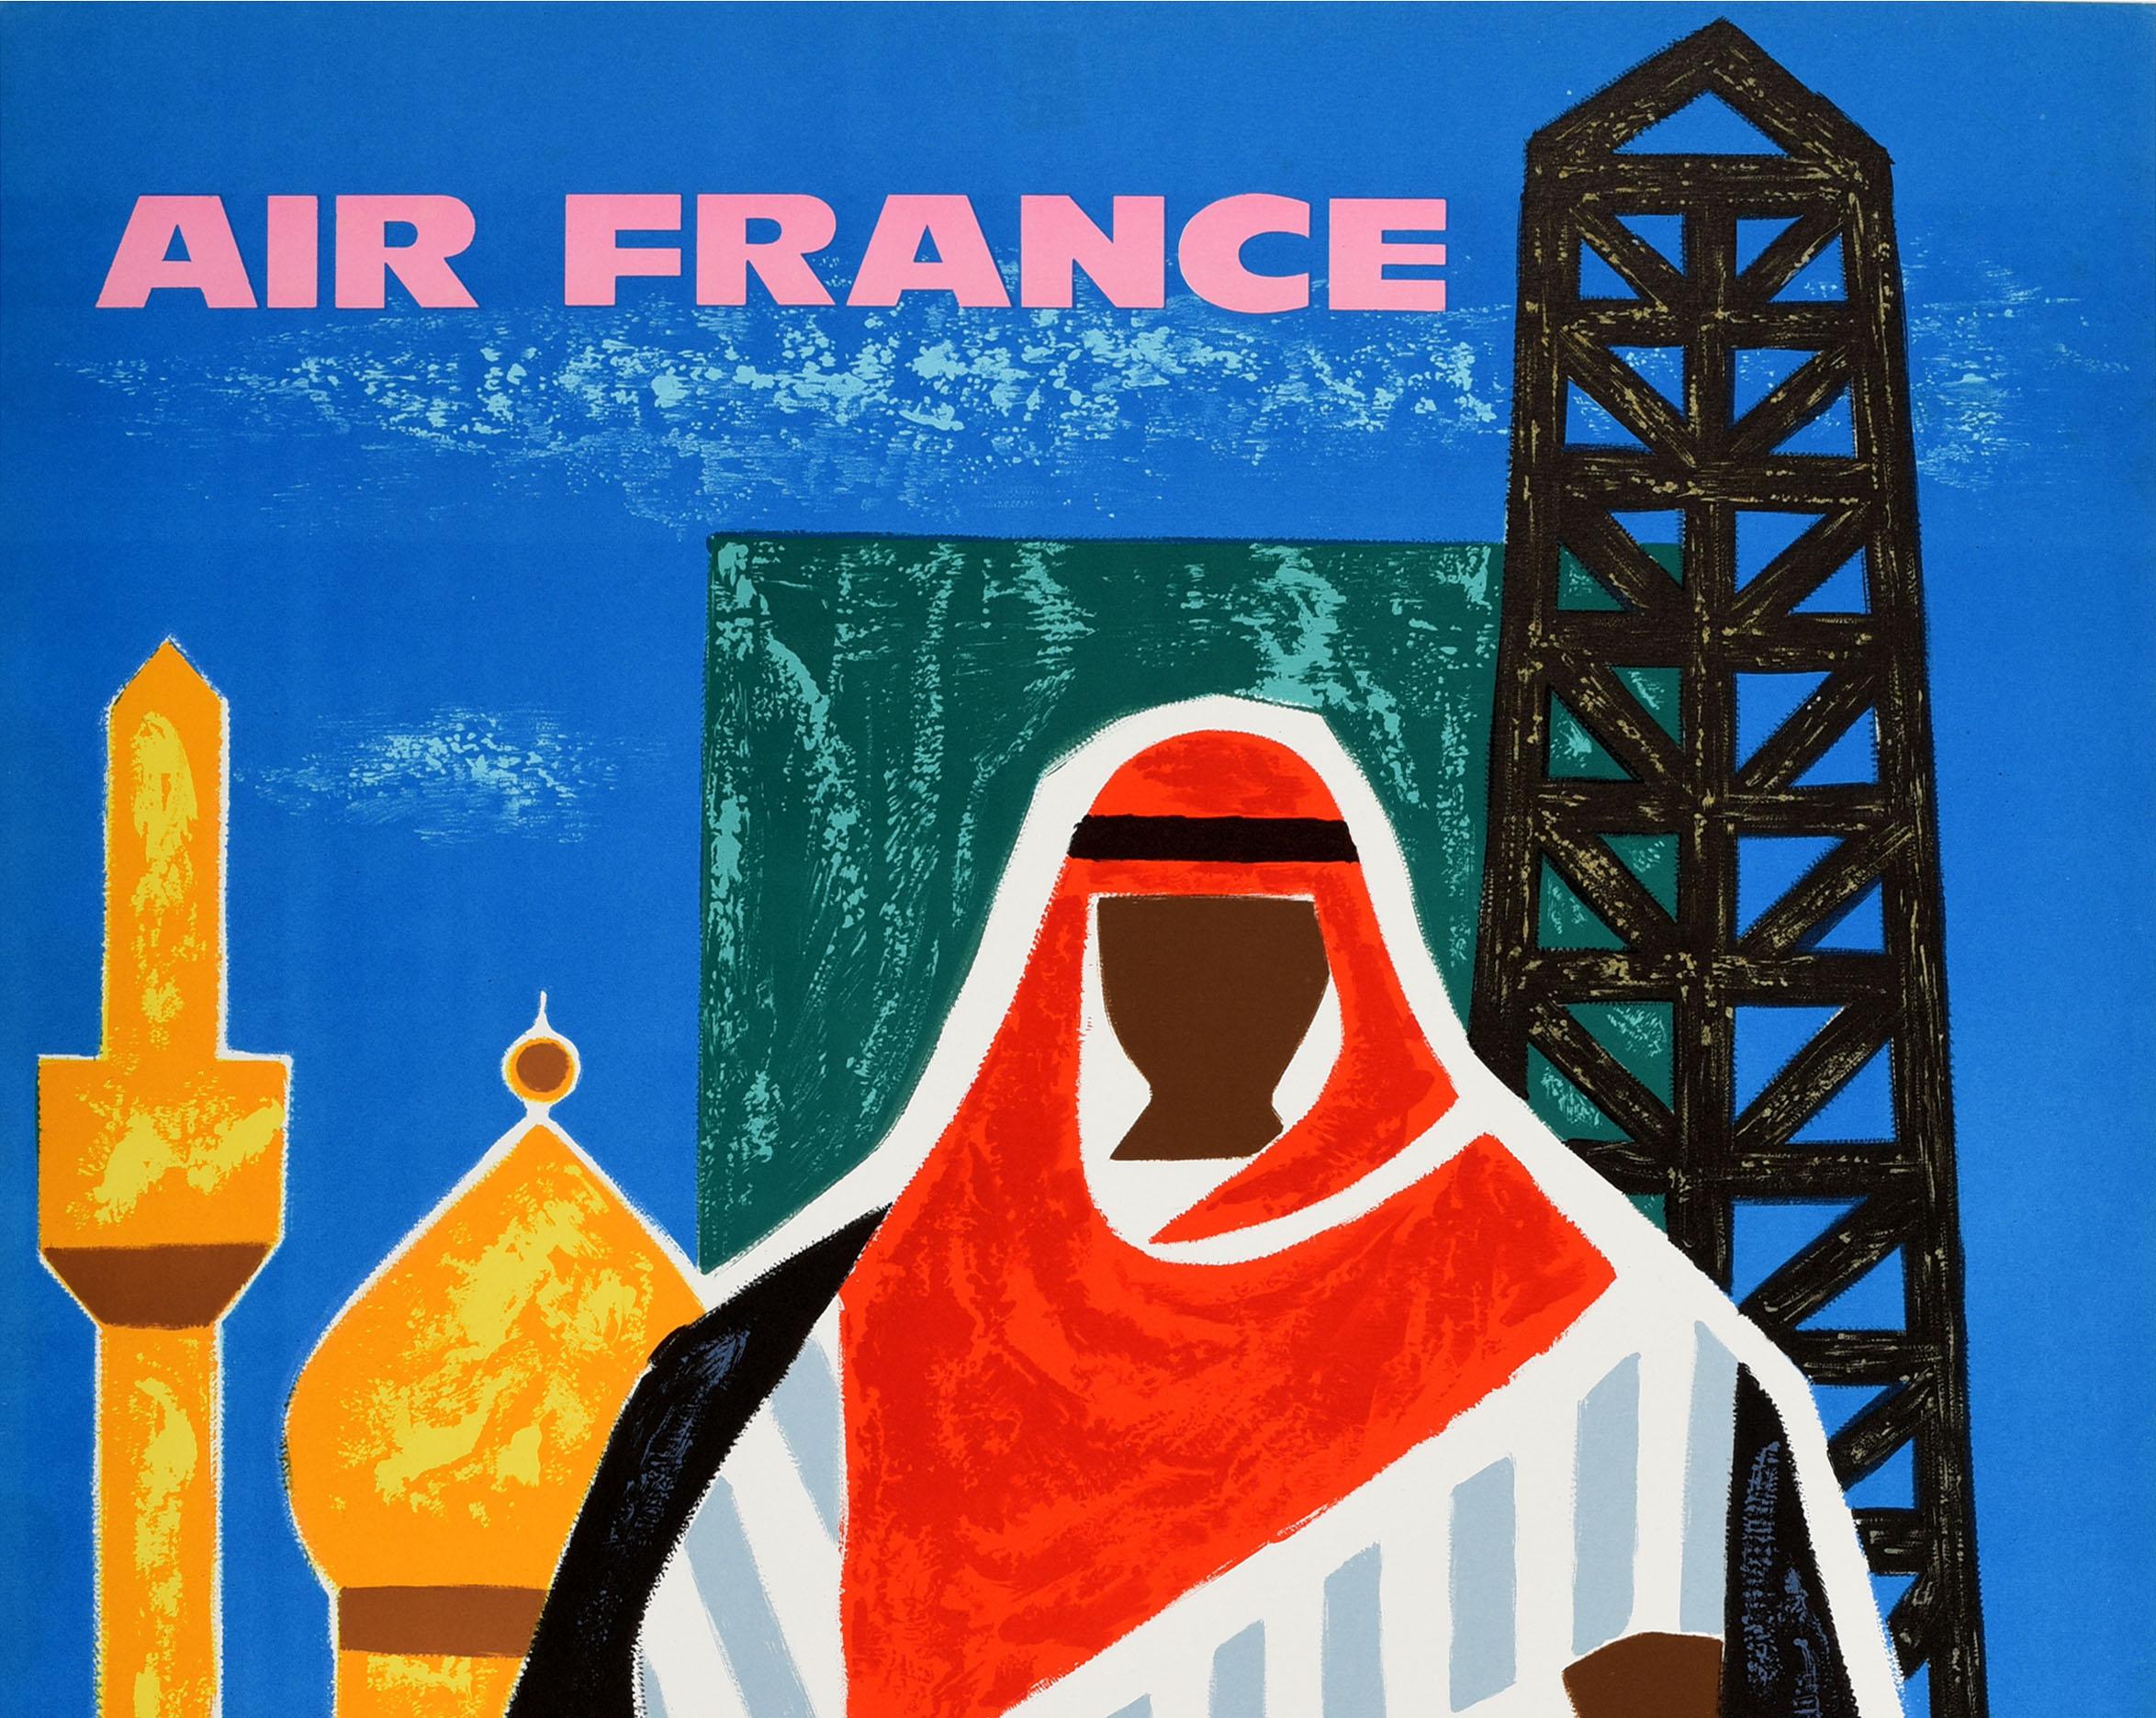 French Original Vintage Travel Advertising Poster Air France Near East Guy Georget Art